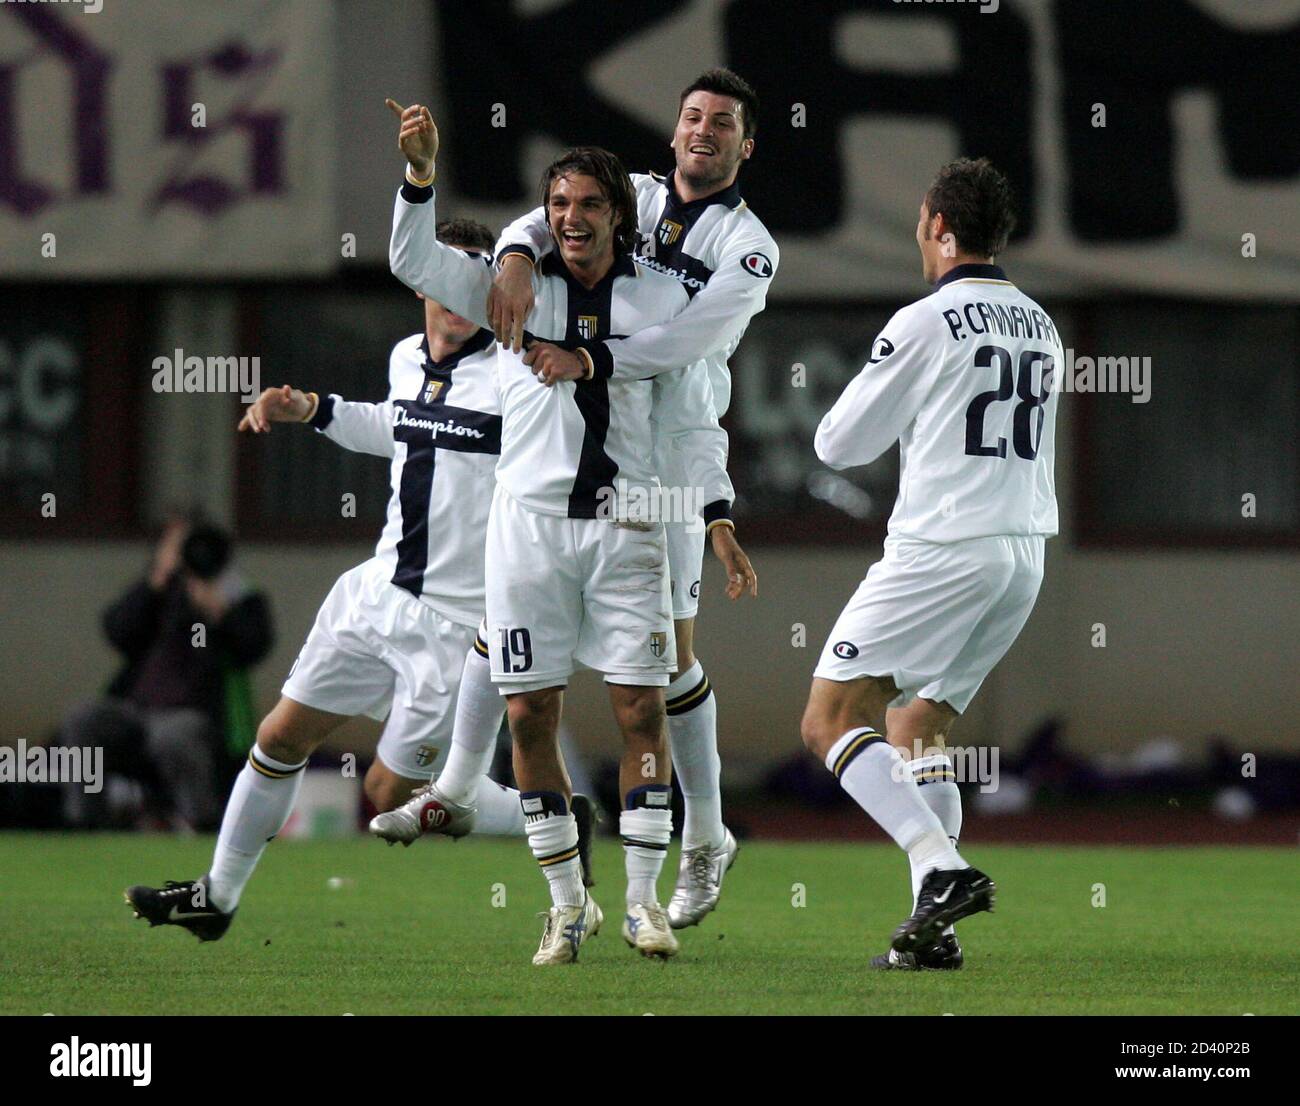 Parma celebrates a goal against Austria Vienna during their UEFA Cup quarter-final first leg soccer match at the Happel Stadium.  Paolo Cannavaro (R, 28), Andrea Pisanu (L, 19) and Cesare Bovo (C, top) of Italy's Parma celebrate a goal against Austria Vienna during their UEFA Cup quarter-final first leg soccer match at the Happel Stadium, Vienna, April 7, 2005. REUTERS/Robert Zolles Stock Photo